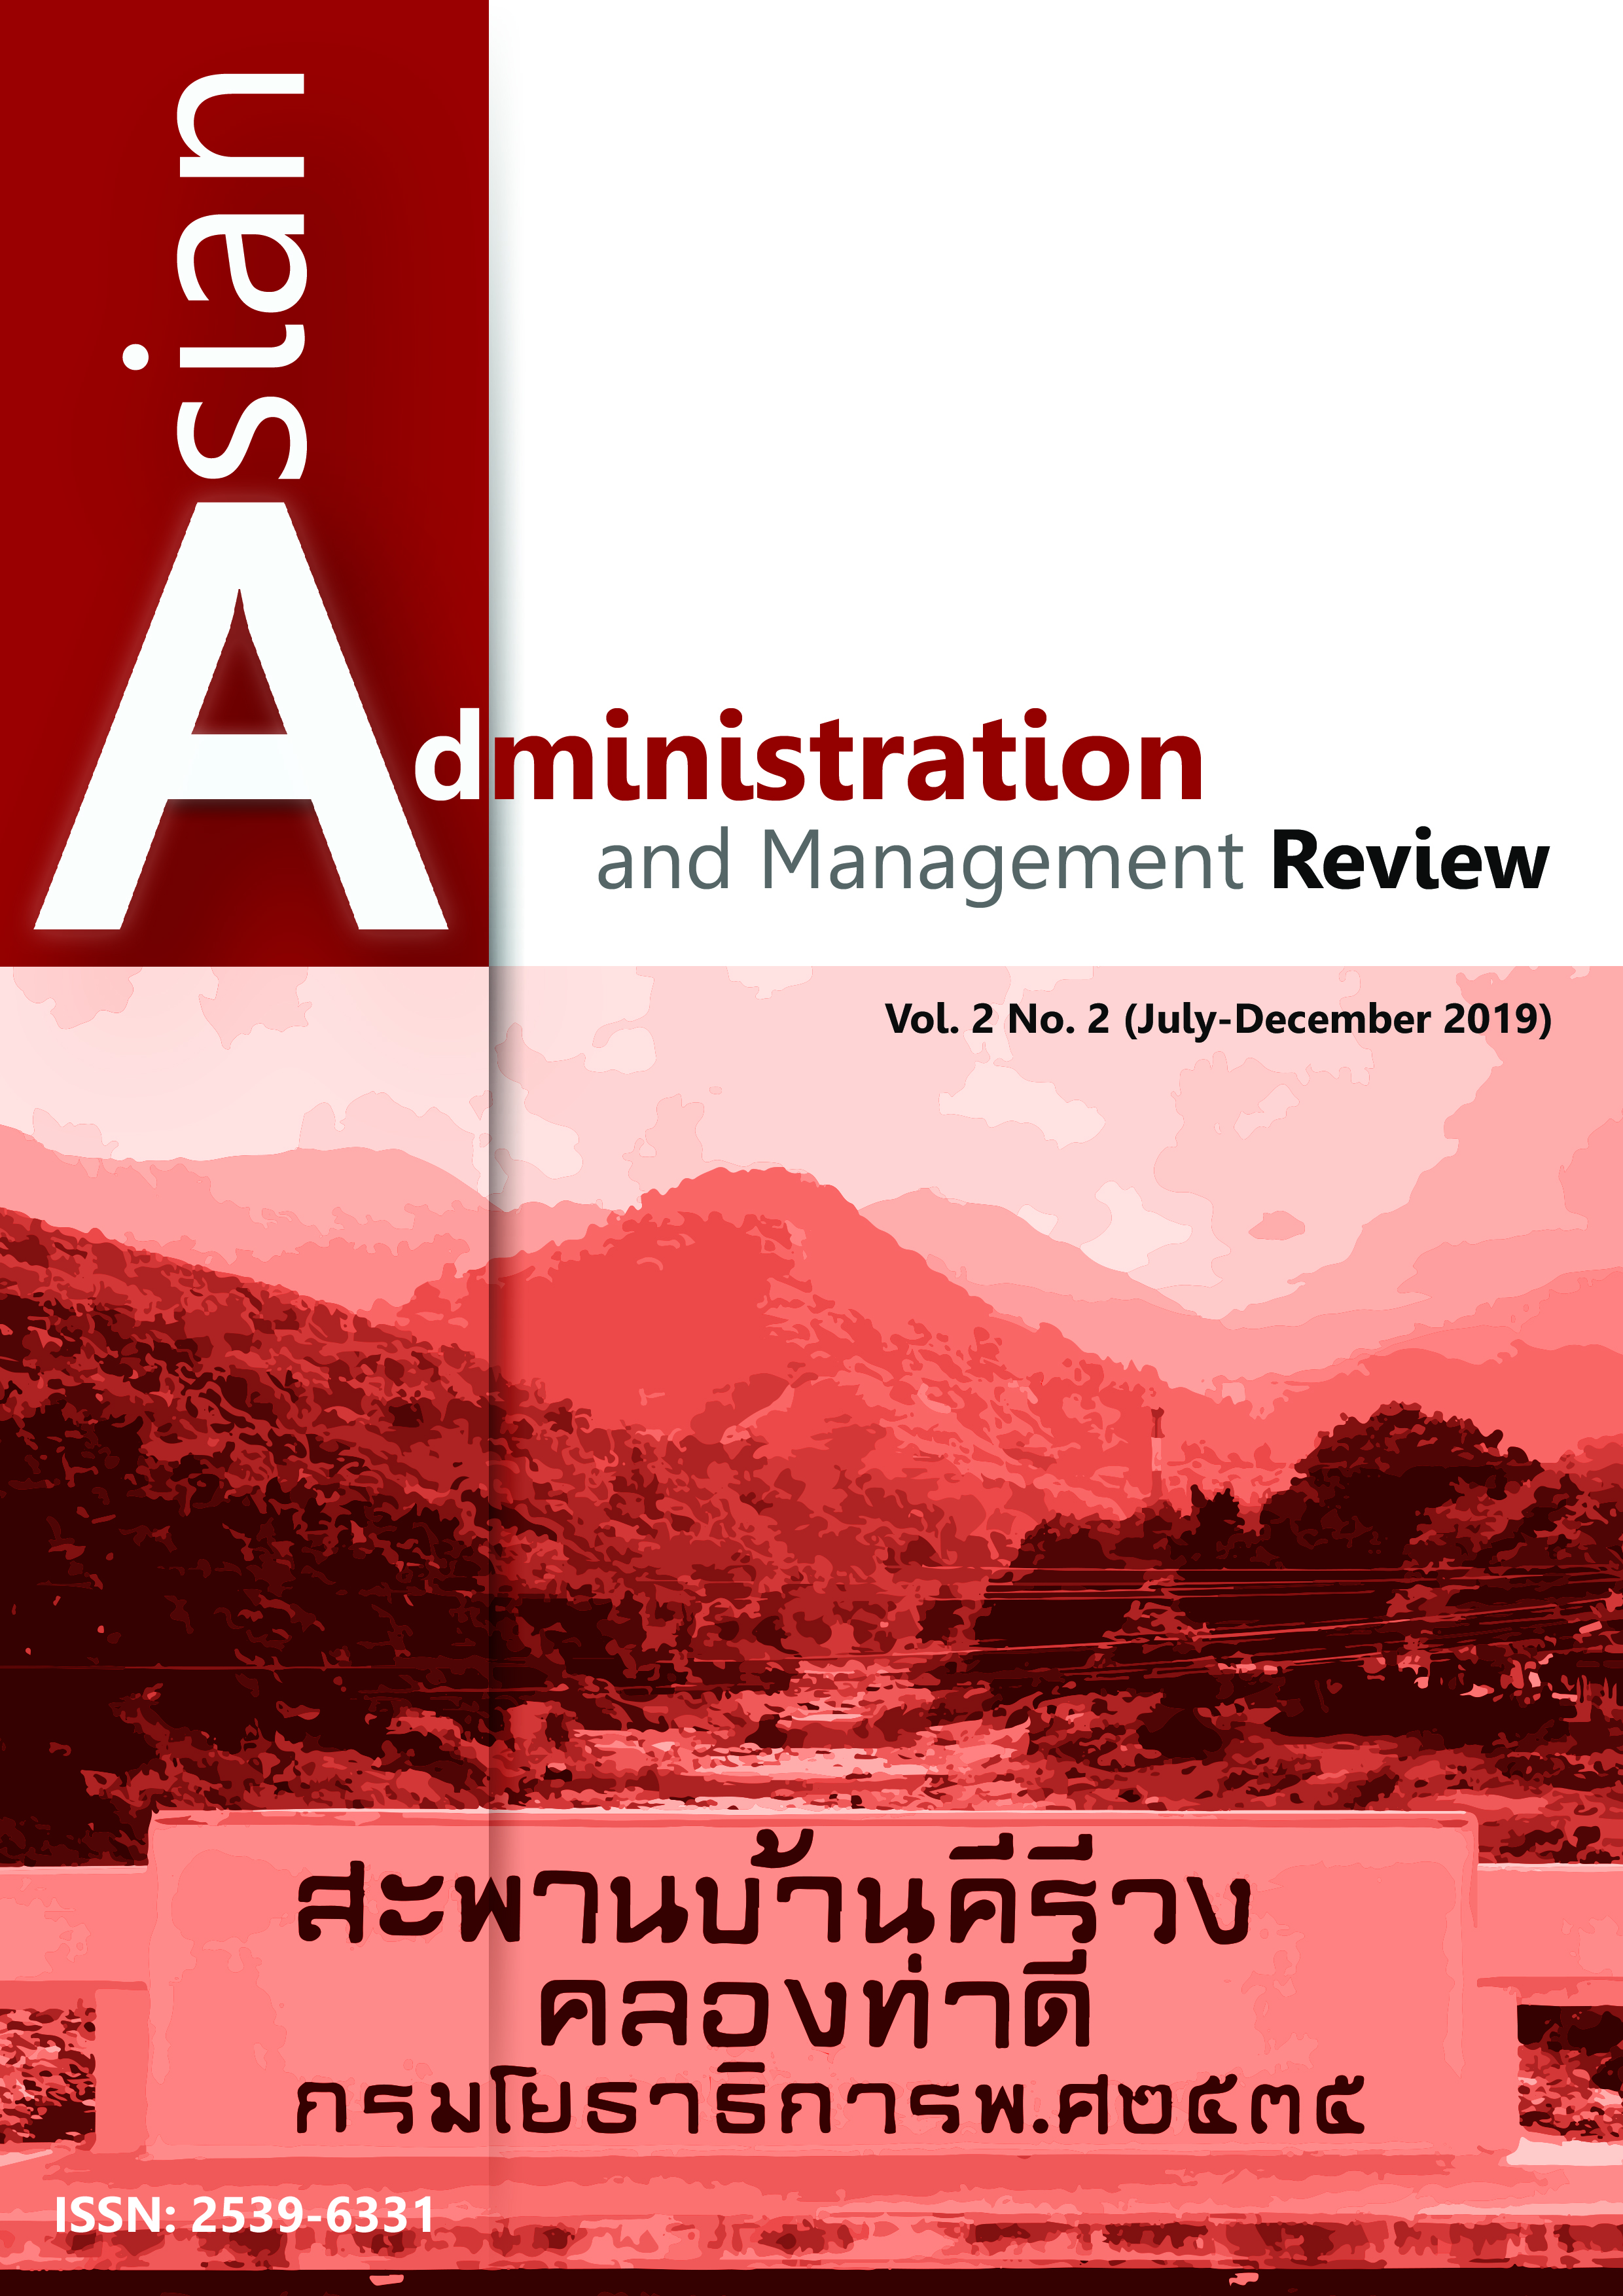 					View Vol. 2 No. 2 (2019): Asian Administration and Management Review
				